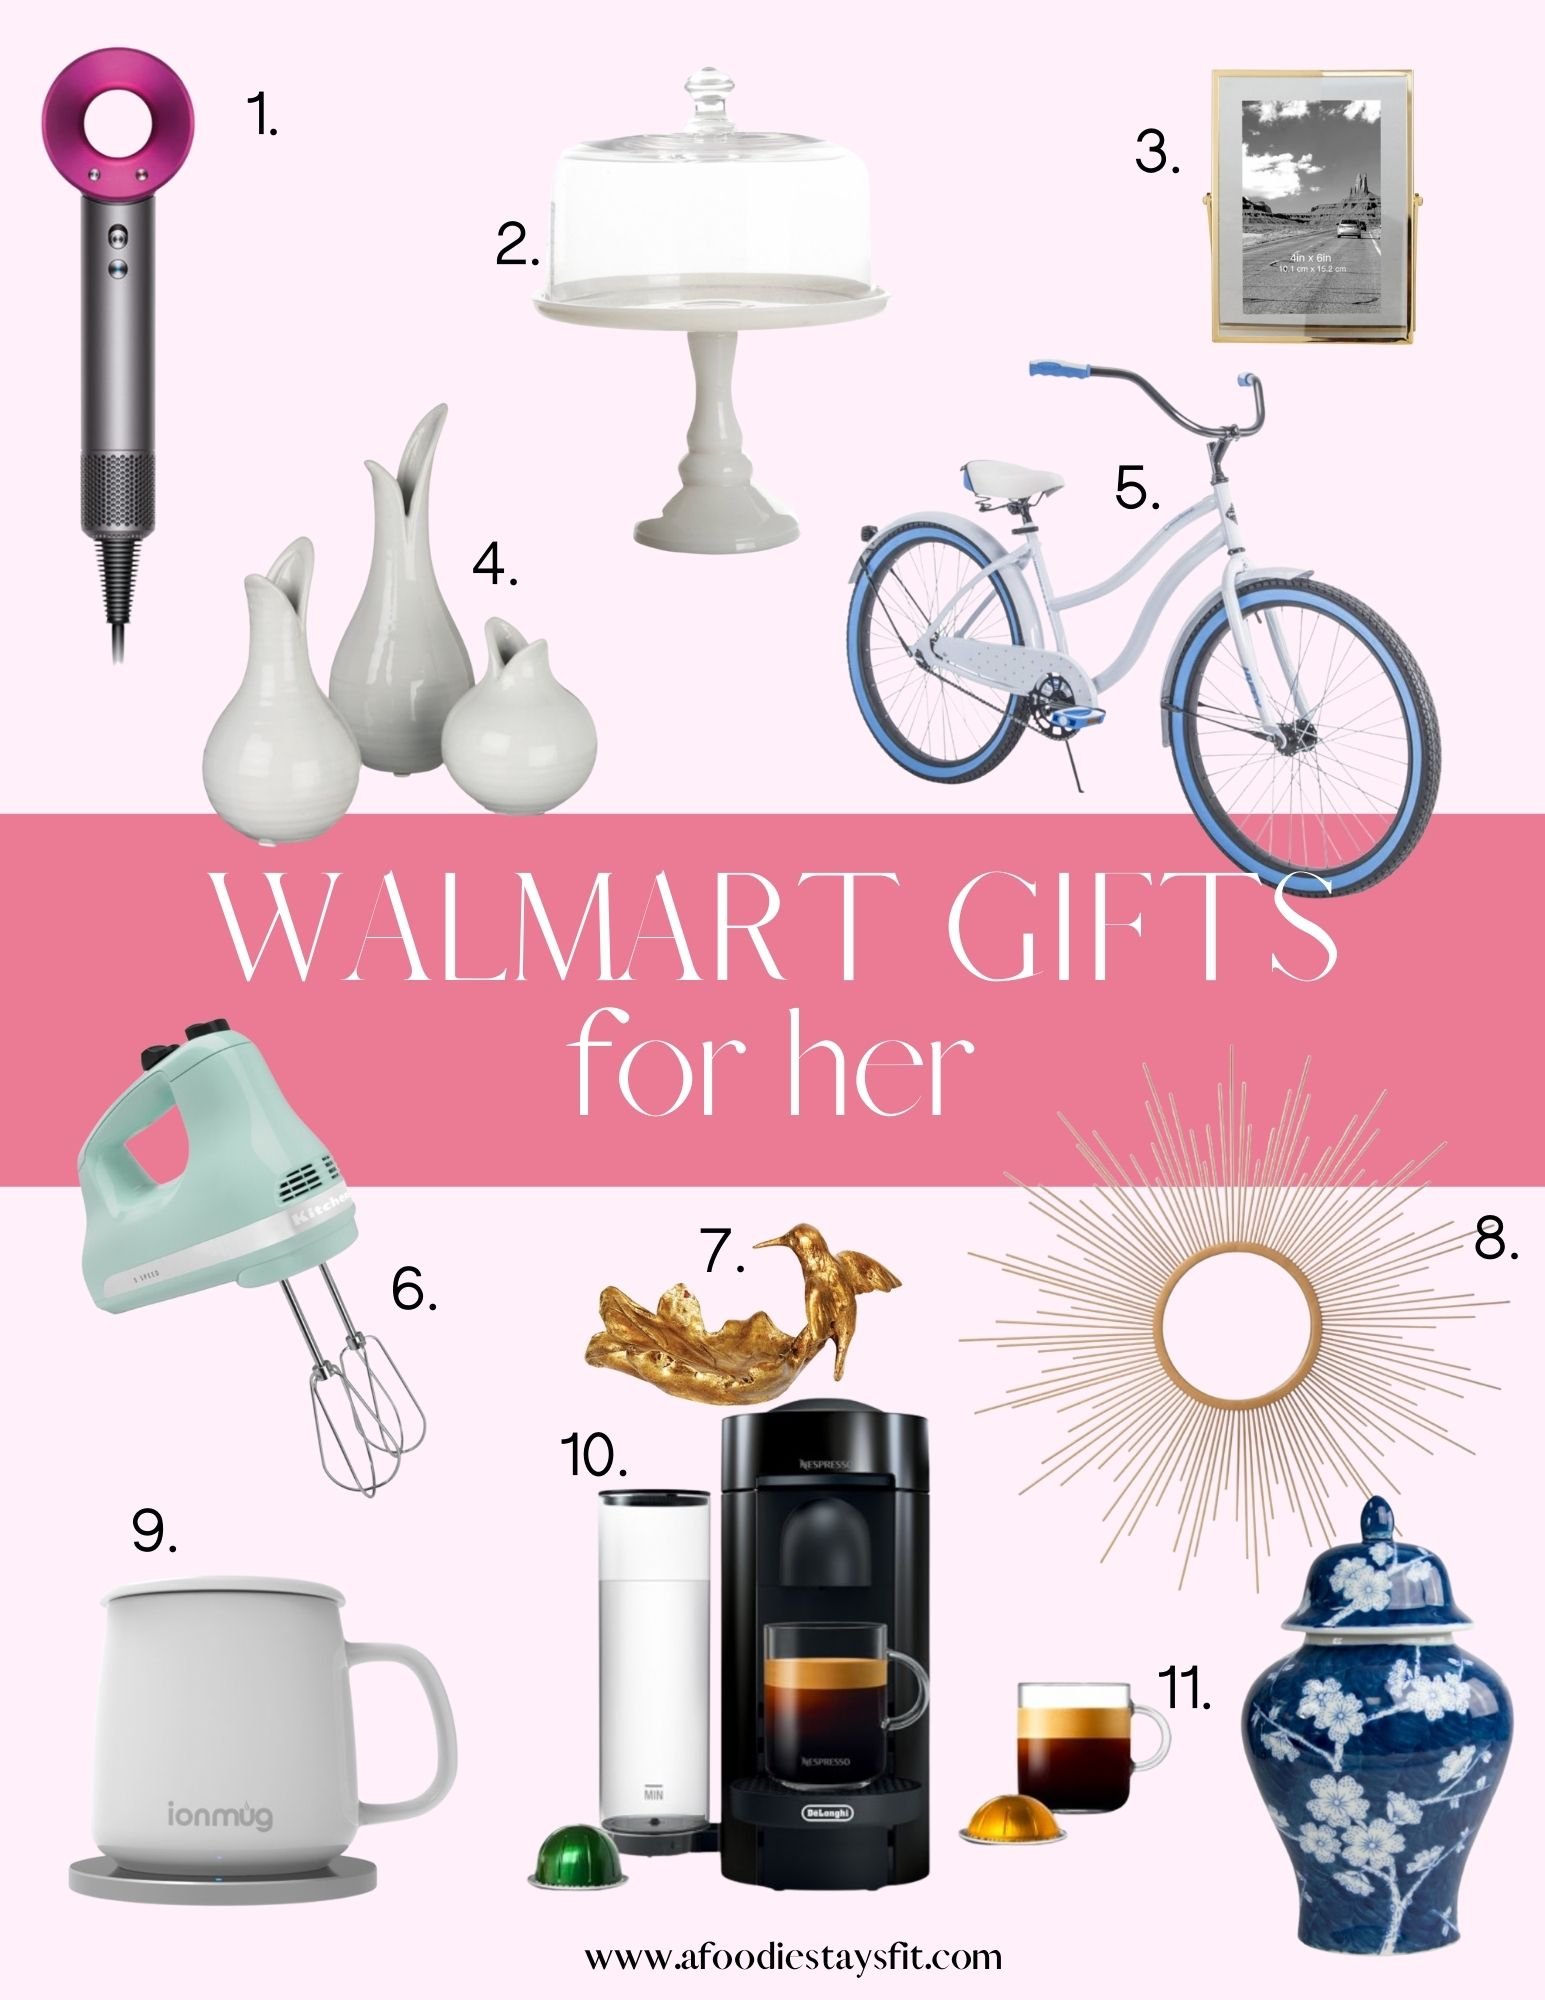 Walmart Gifts for Her